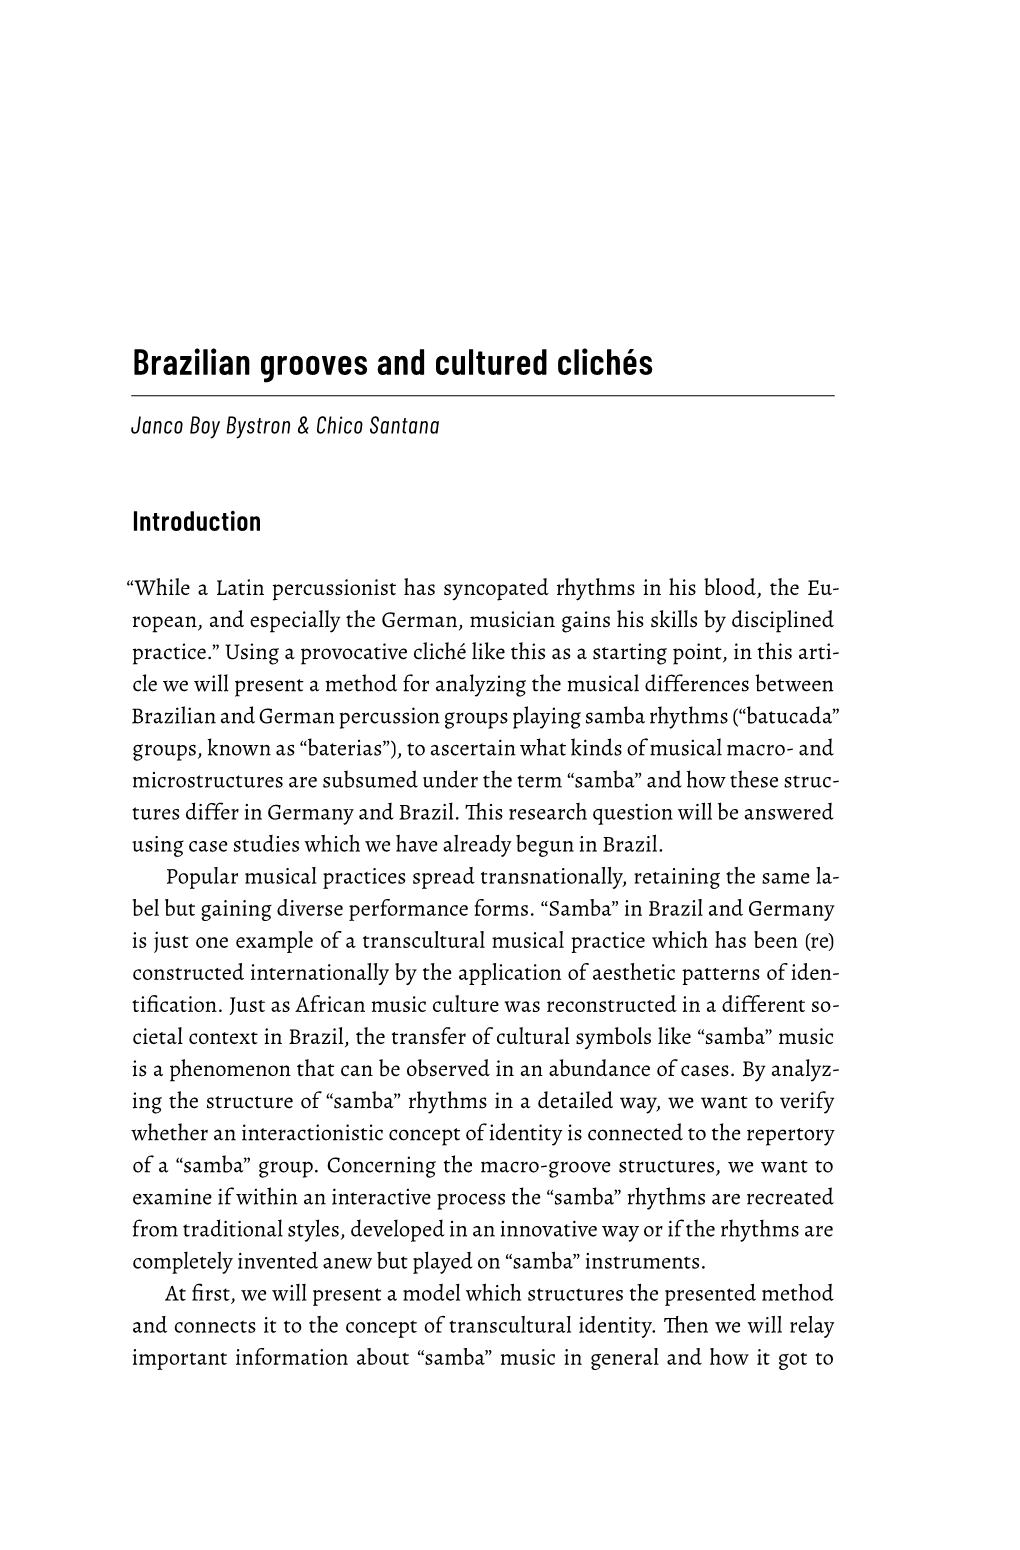 Brazilian Grooves and Cultured Clichés